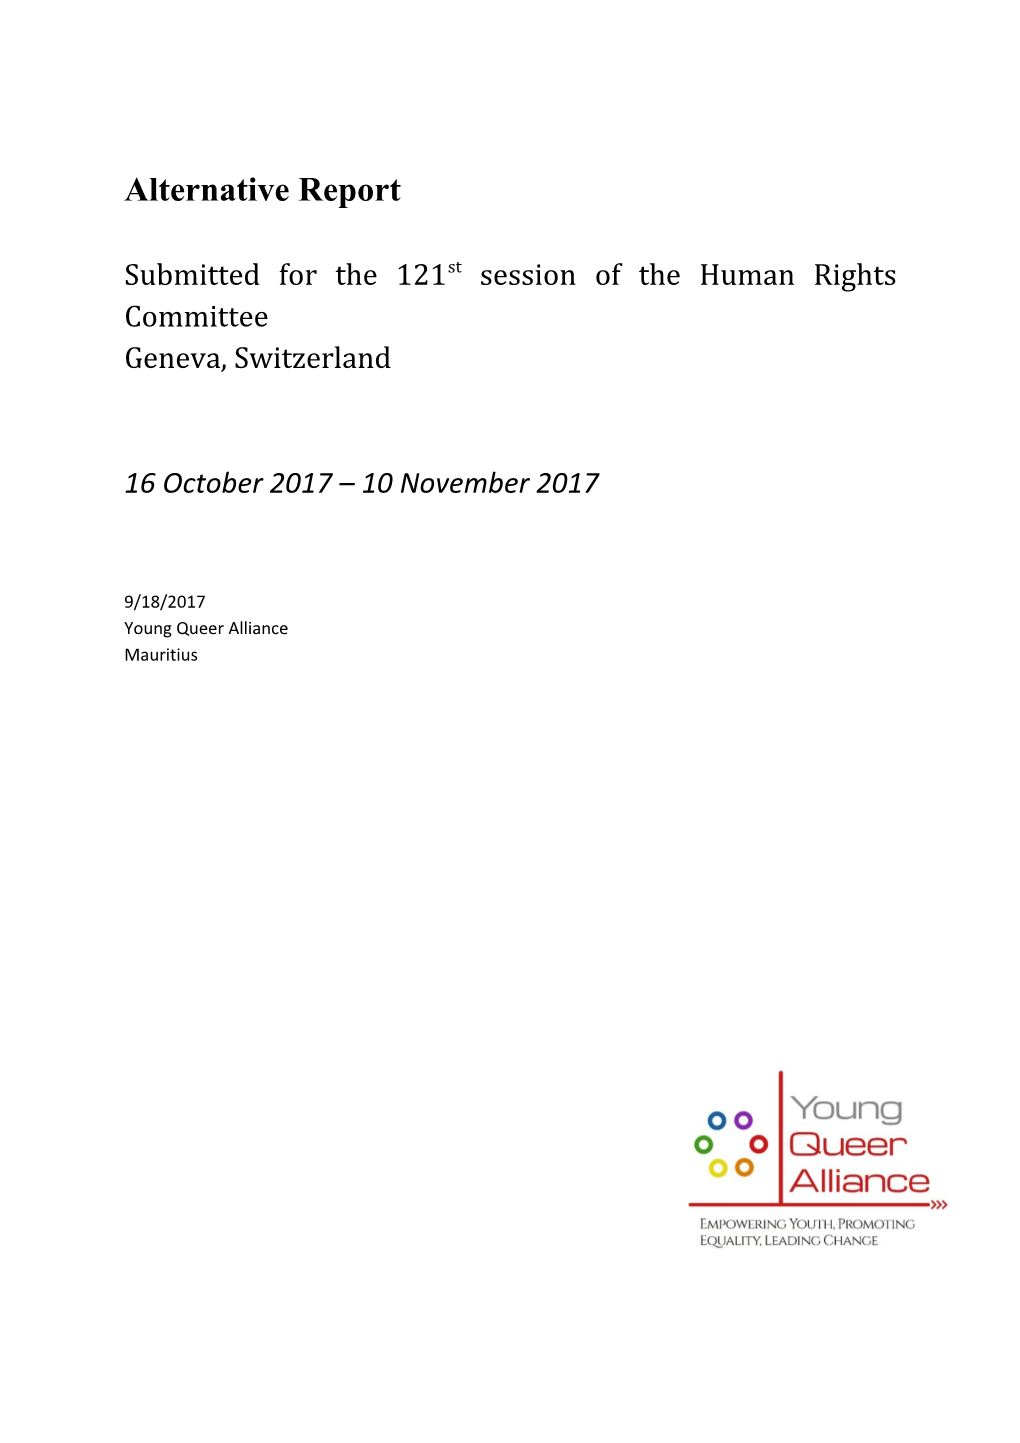 Submitted for the 121Stsession of the Human Rights Committee